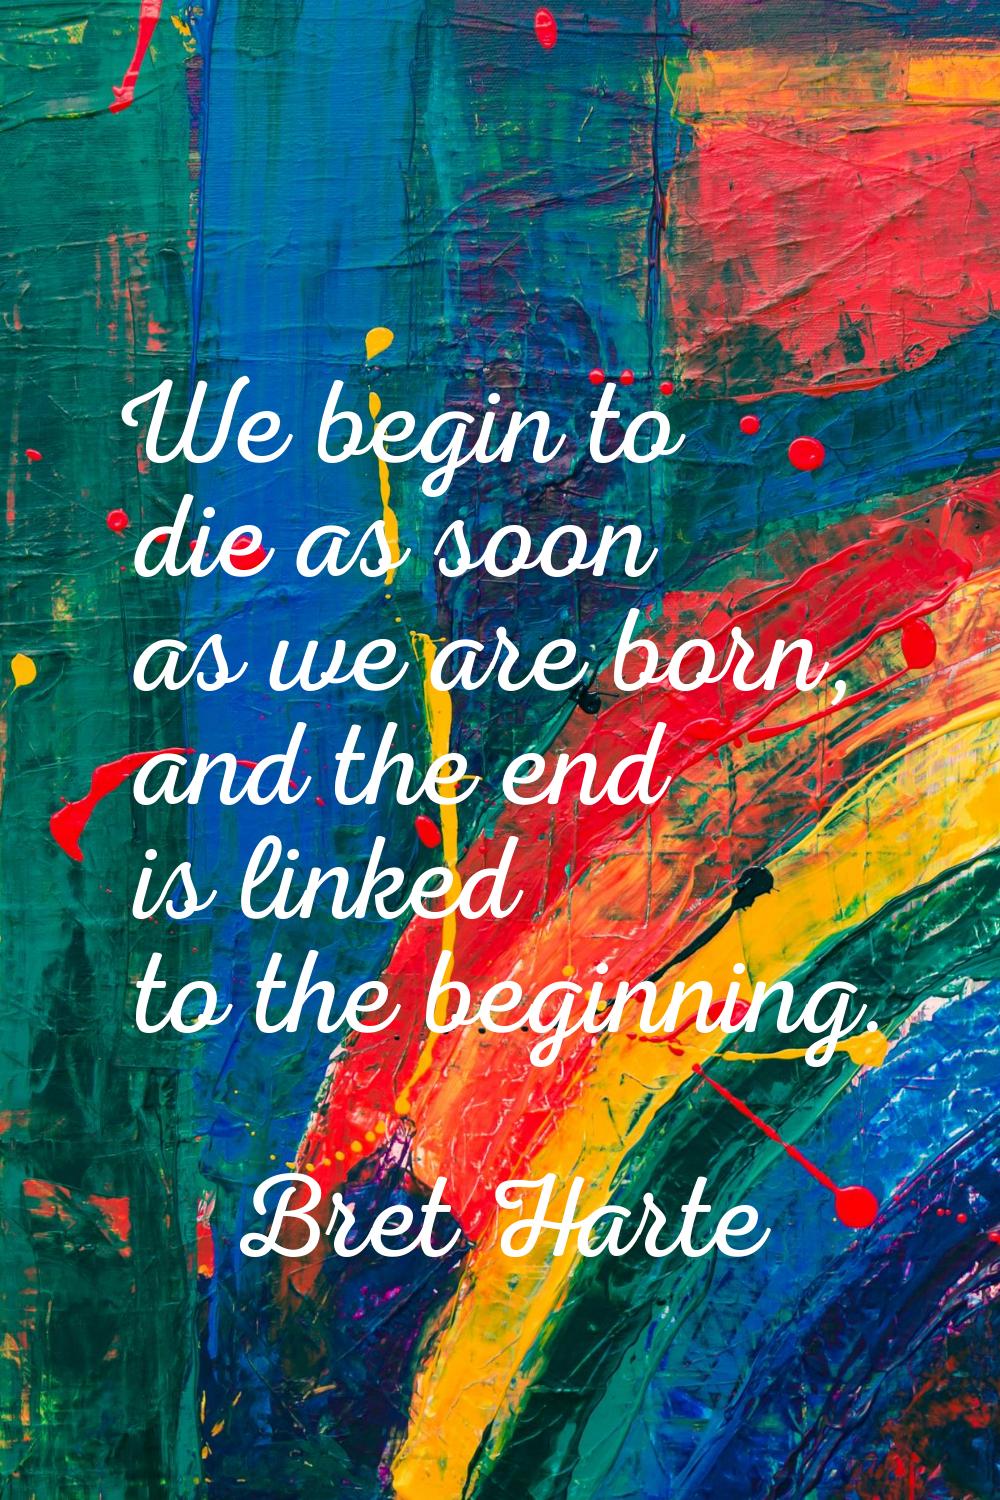 We begin to die as soon as we are born, and the end is linked to the beginning.